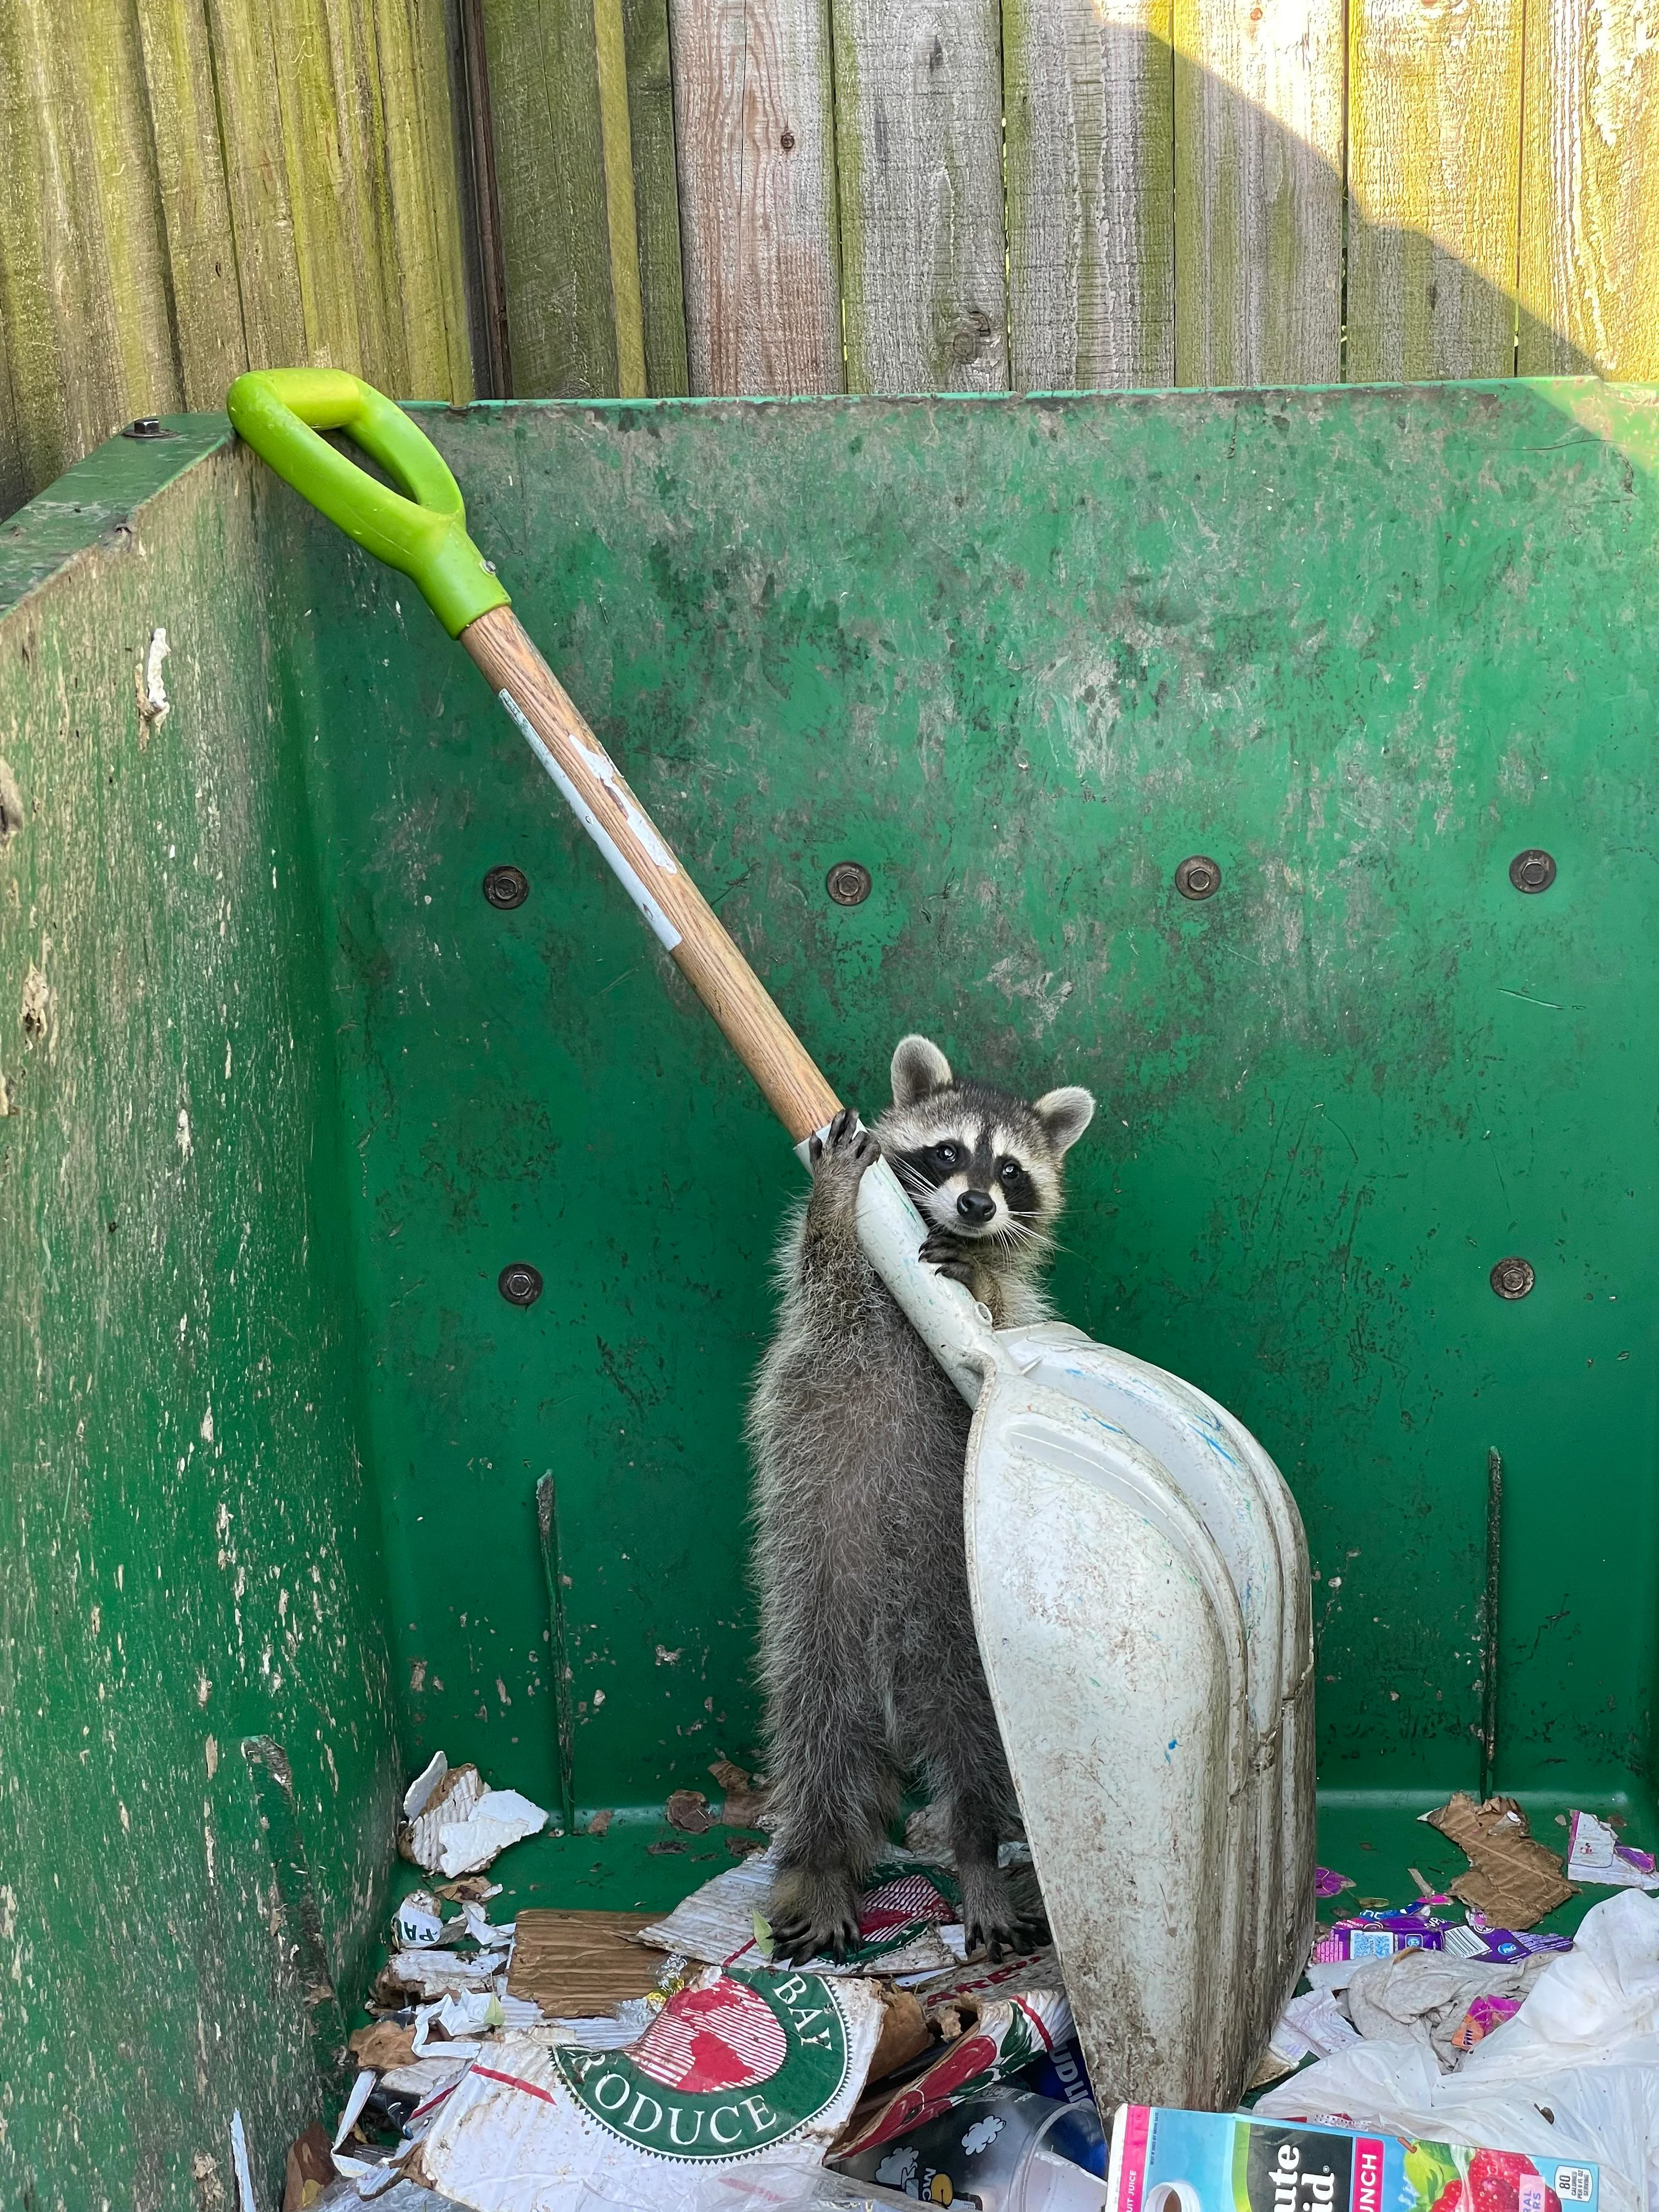 Raccoon shuffling the trash container.